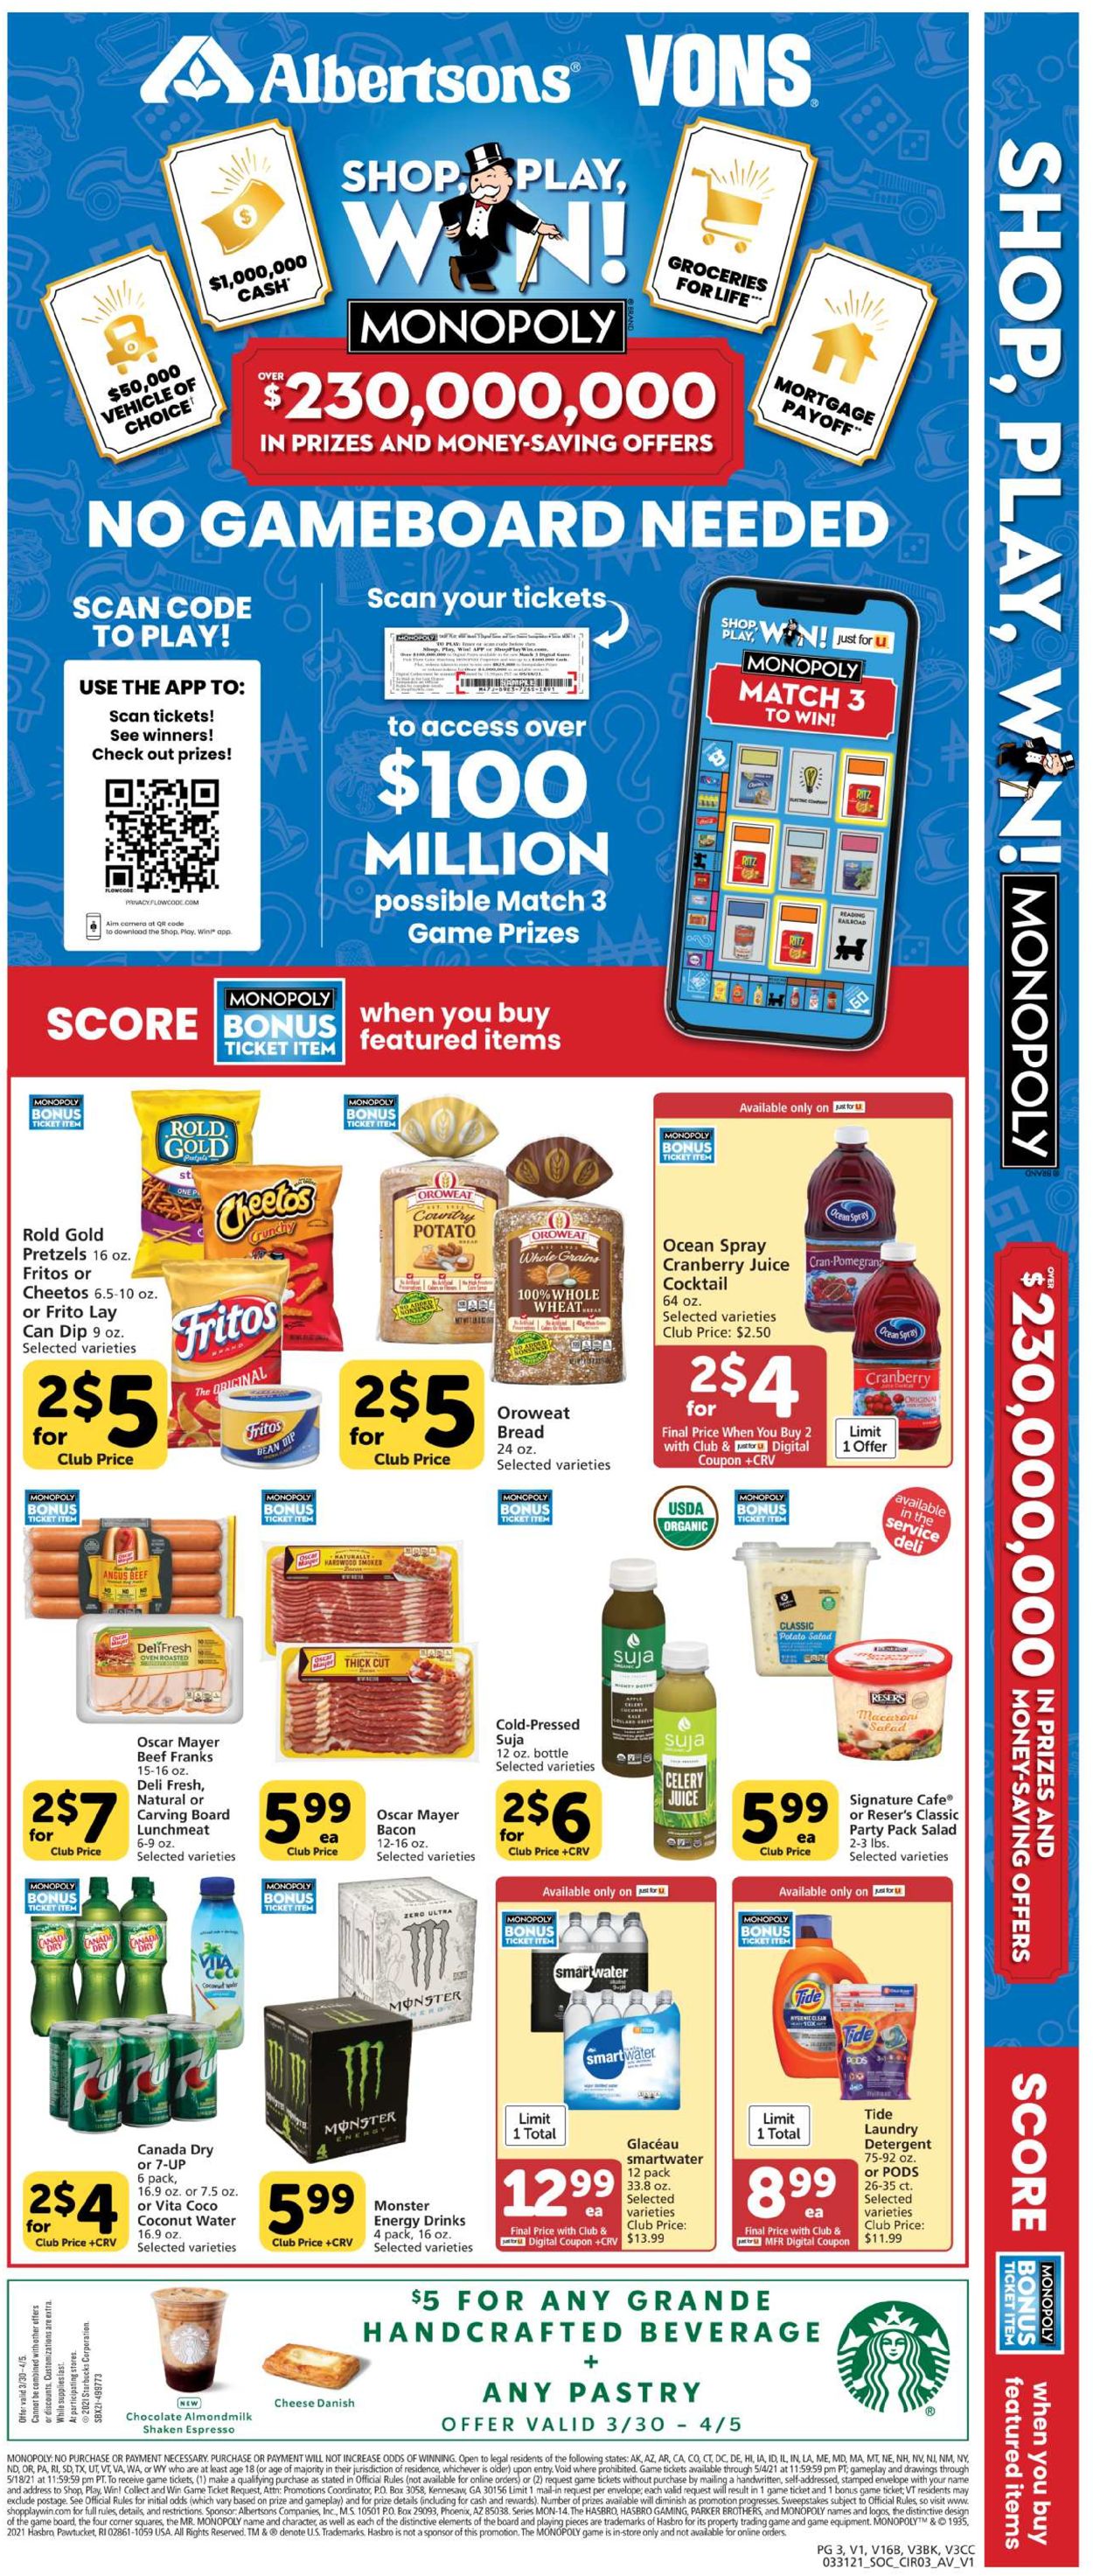 Vons Easter 2021 Current weekly ad 03/31 04/06/2021 [3] frequent